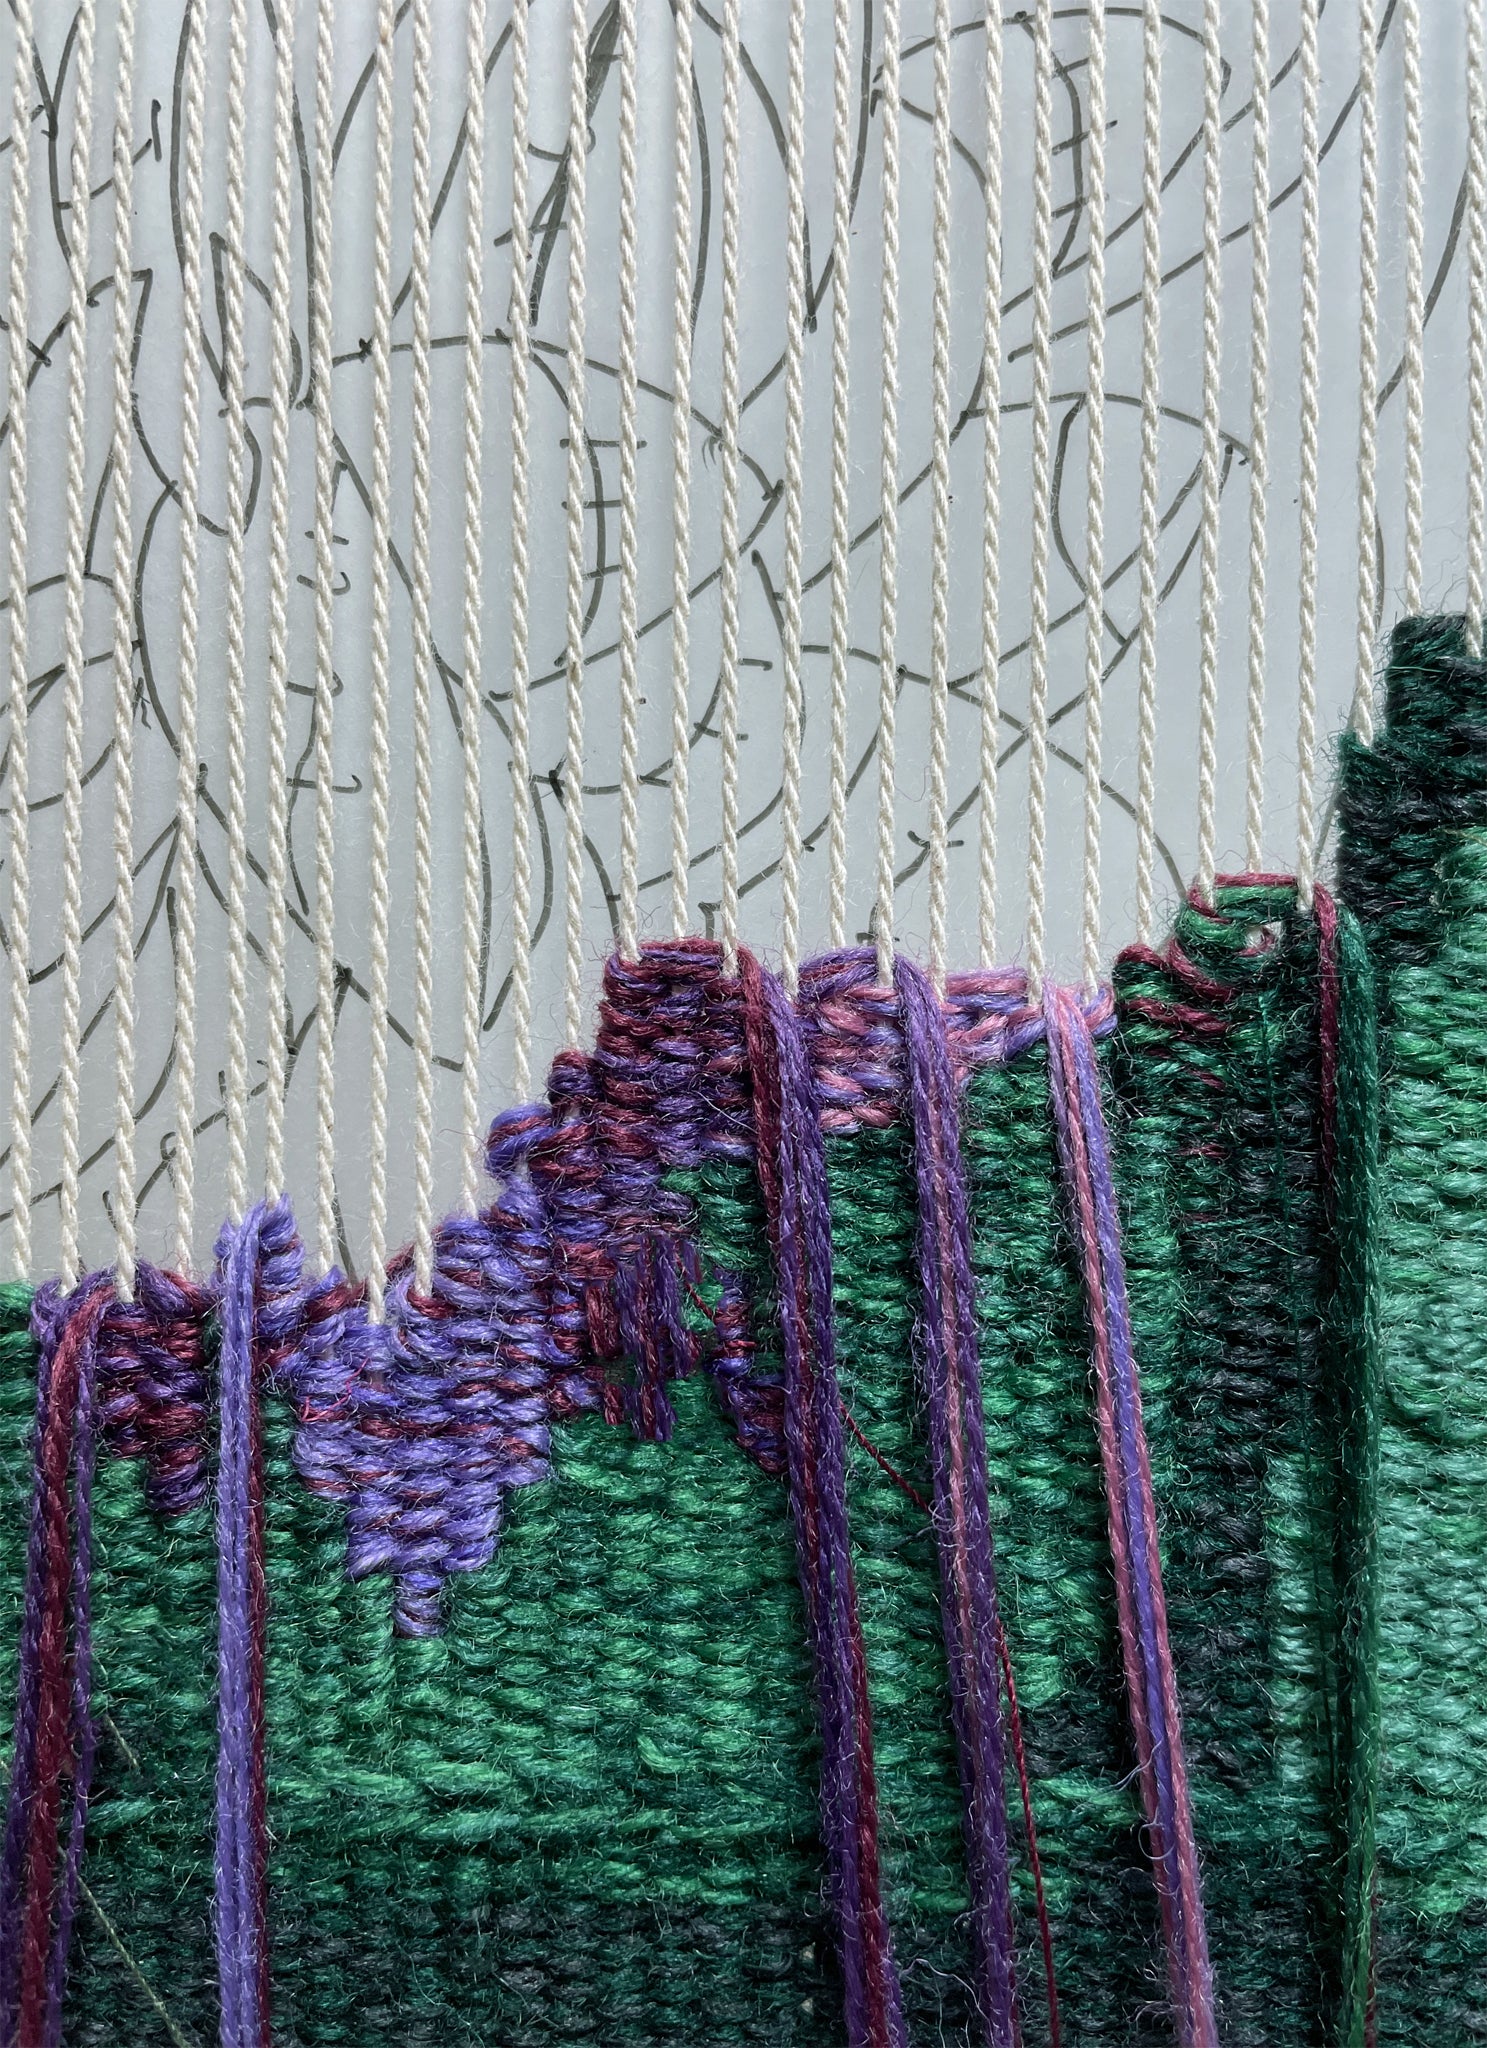 Exploring Images for Tapestry Weaving with Array - Gist Yarn